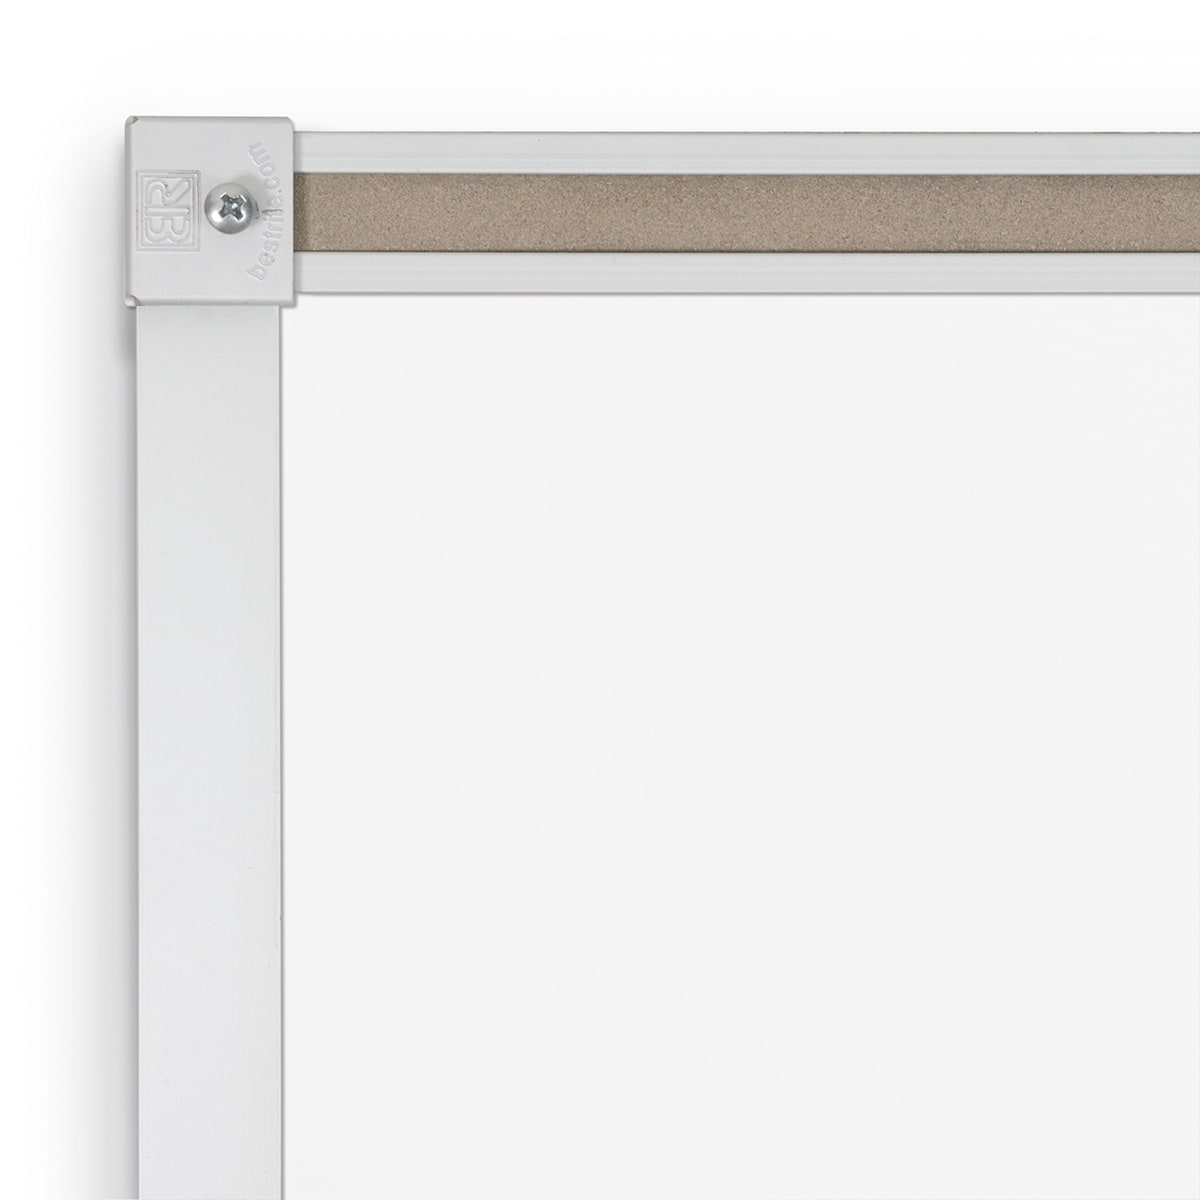 Mooreco Porcelain Markerboard with Deluxe Aluminum Trim - 2'H x 3'W (Mooreco 202AB) - SchoolOutlet